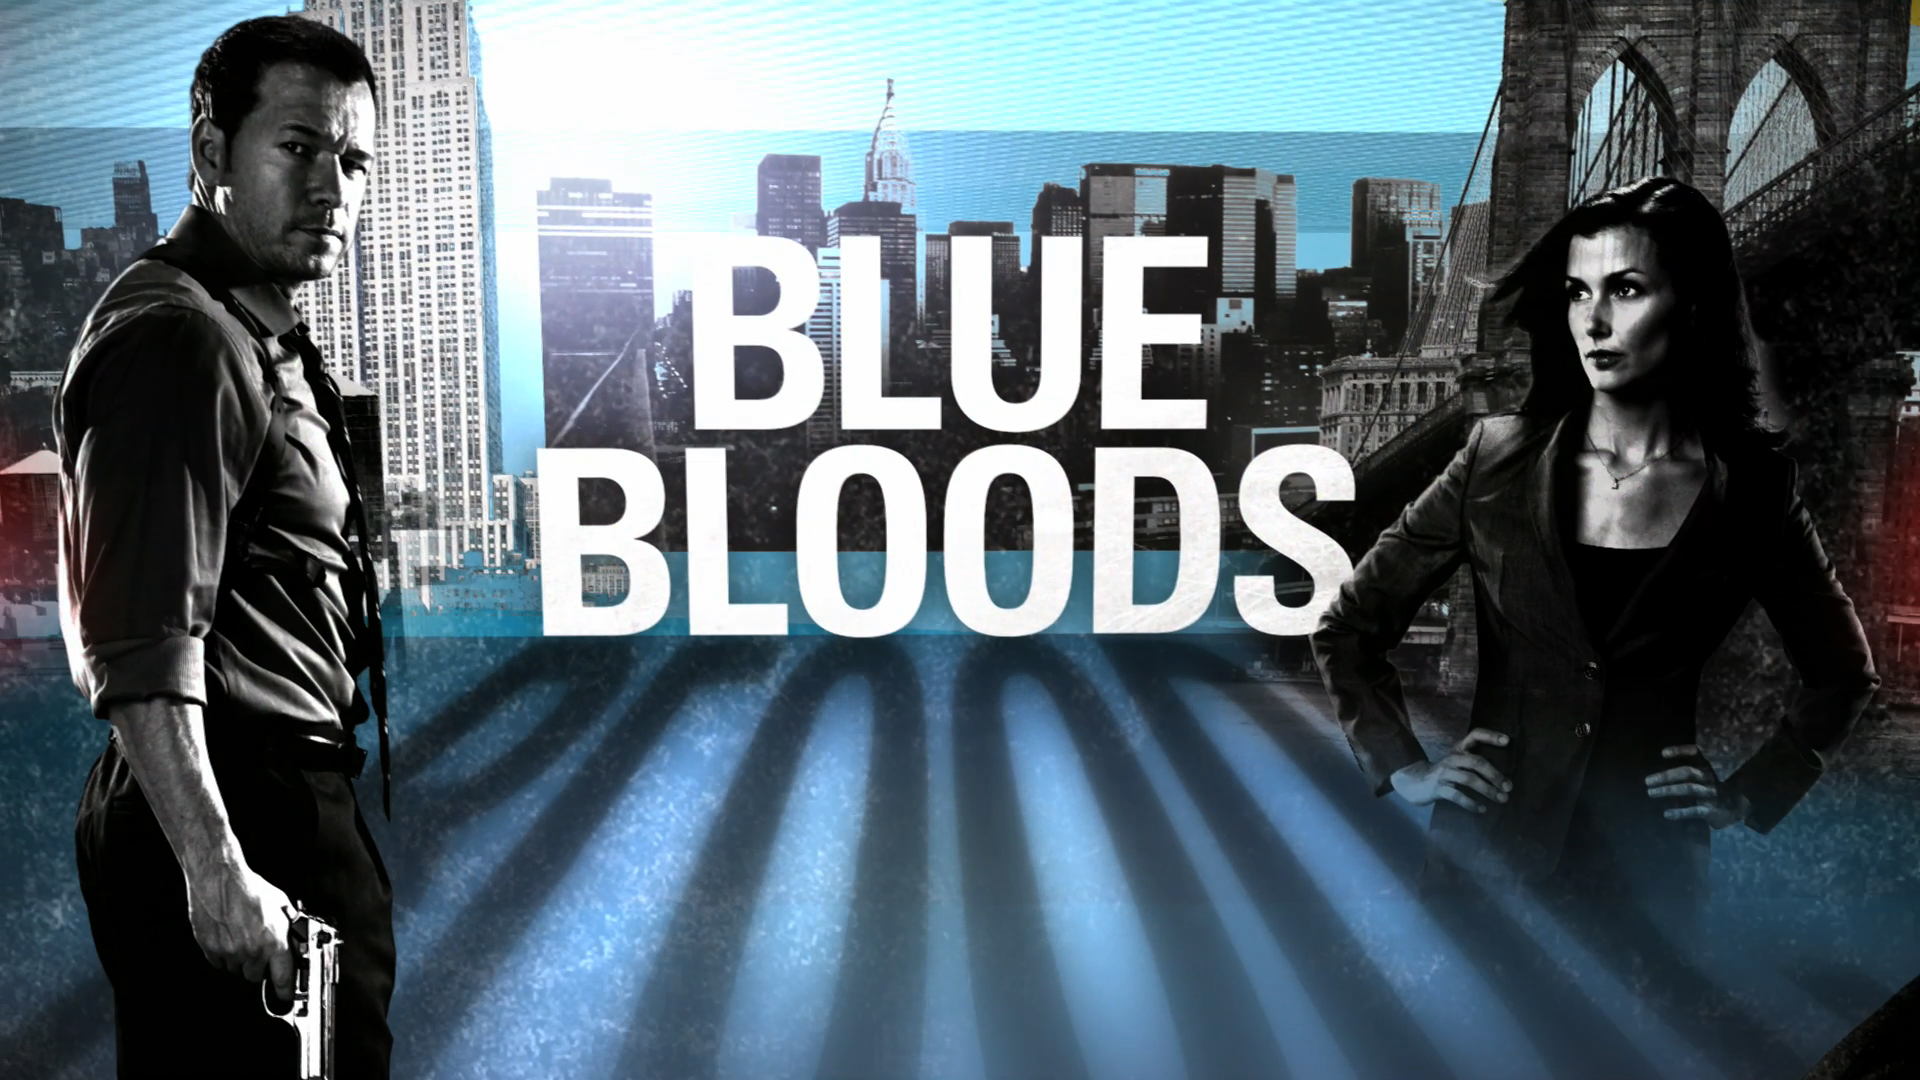 Tom Selleck Hopes CBS Reconsiders 'Blue Bloods' Cancellation